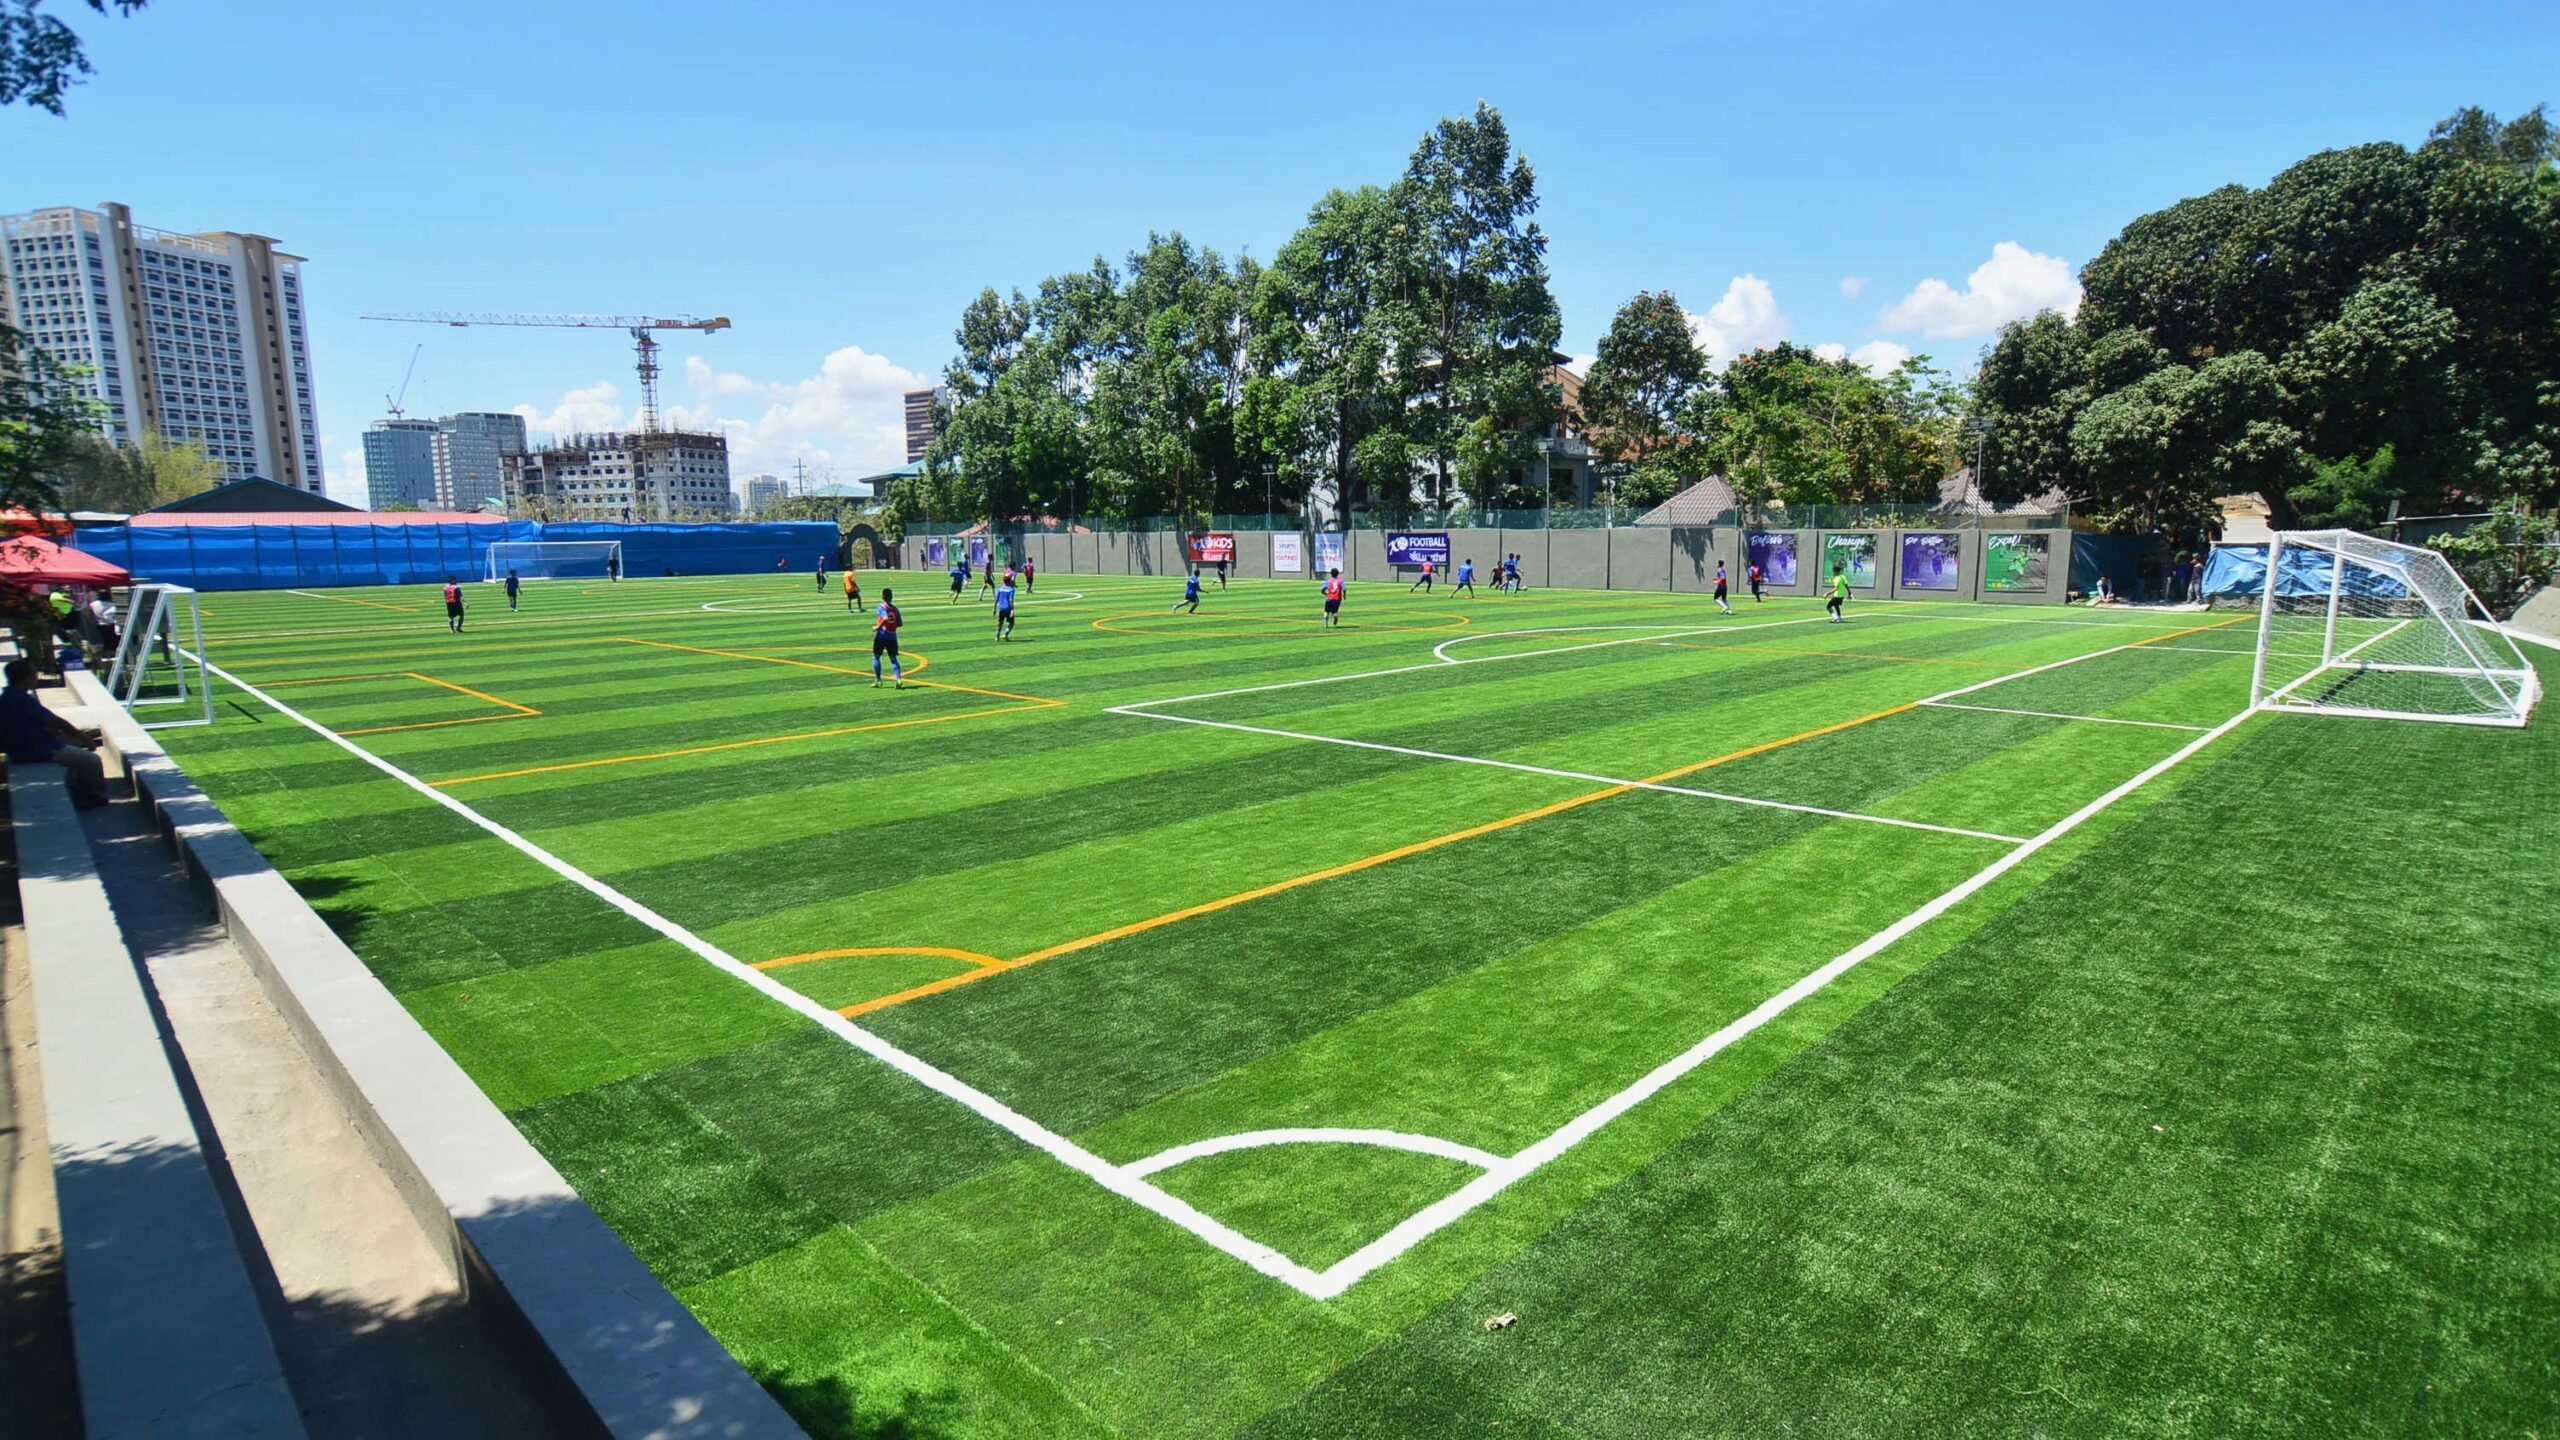 IN PHOTOS: Tuloy Foundation’s new artificial-grass football field in Alabang